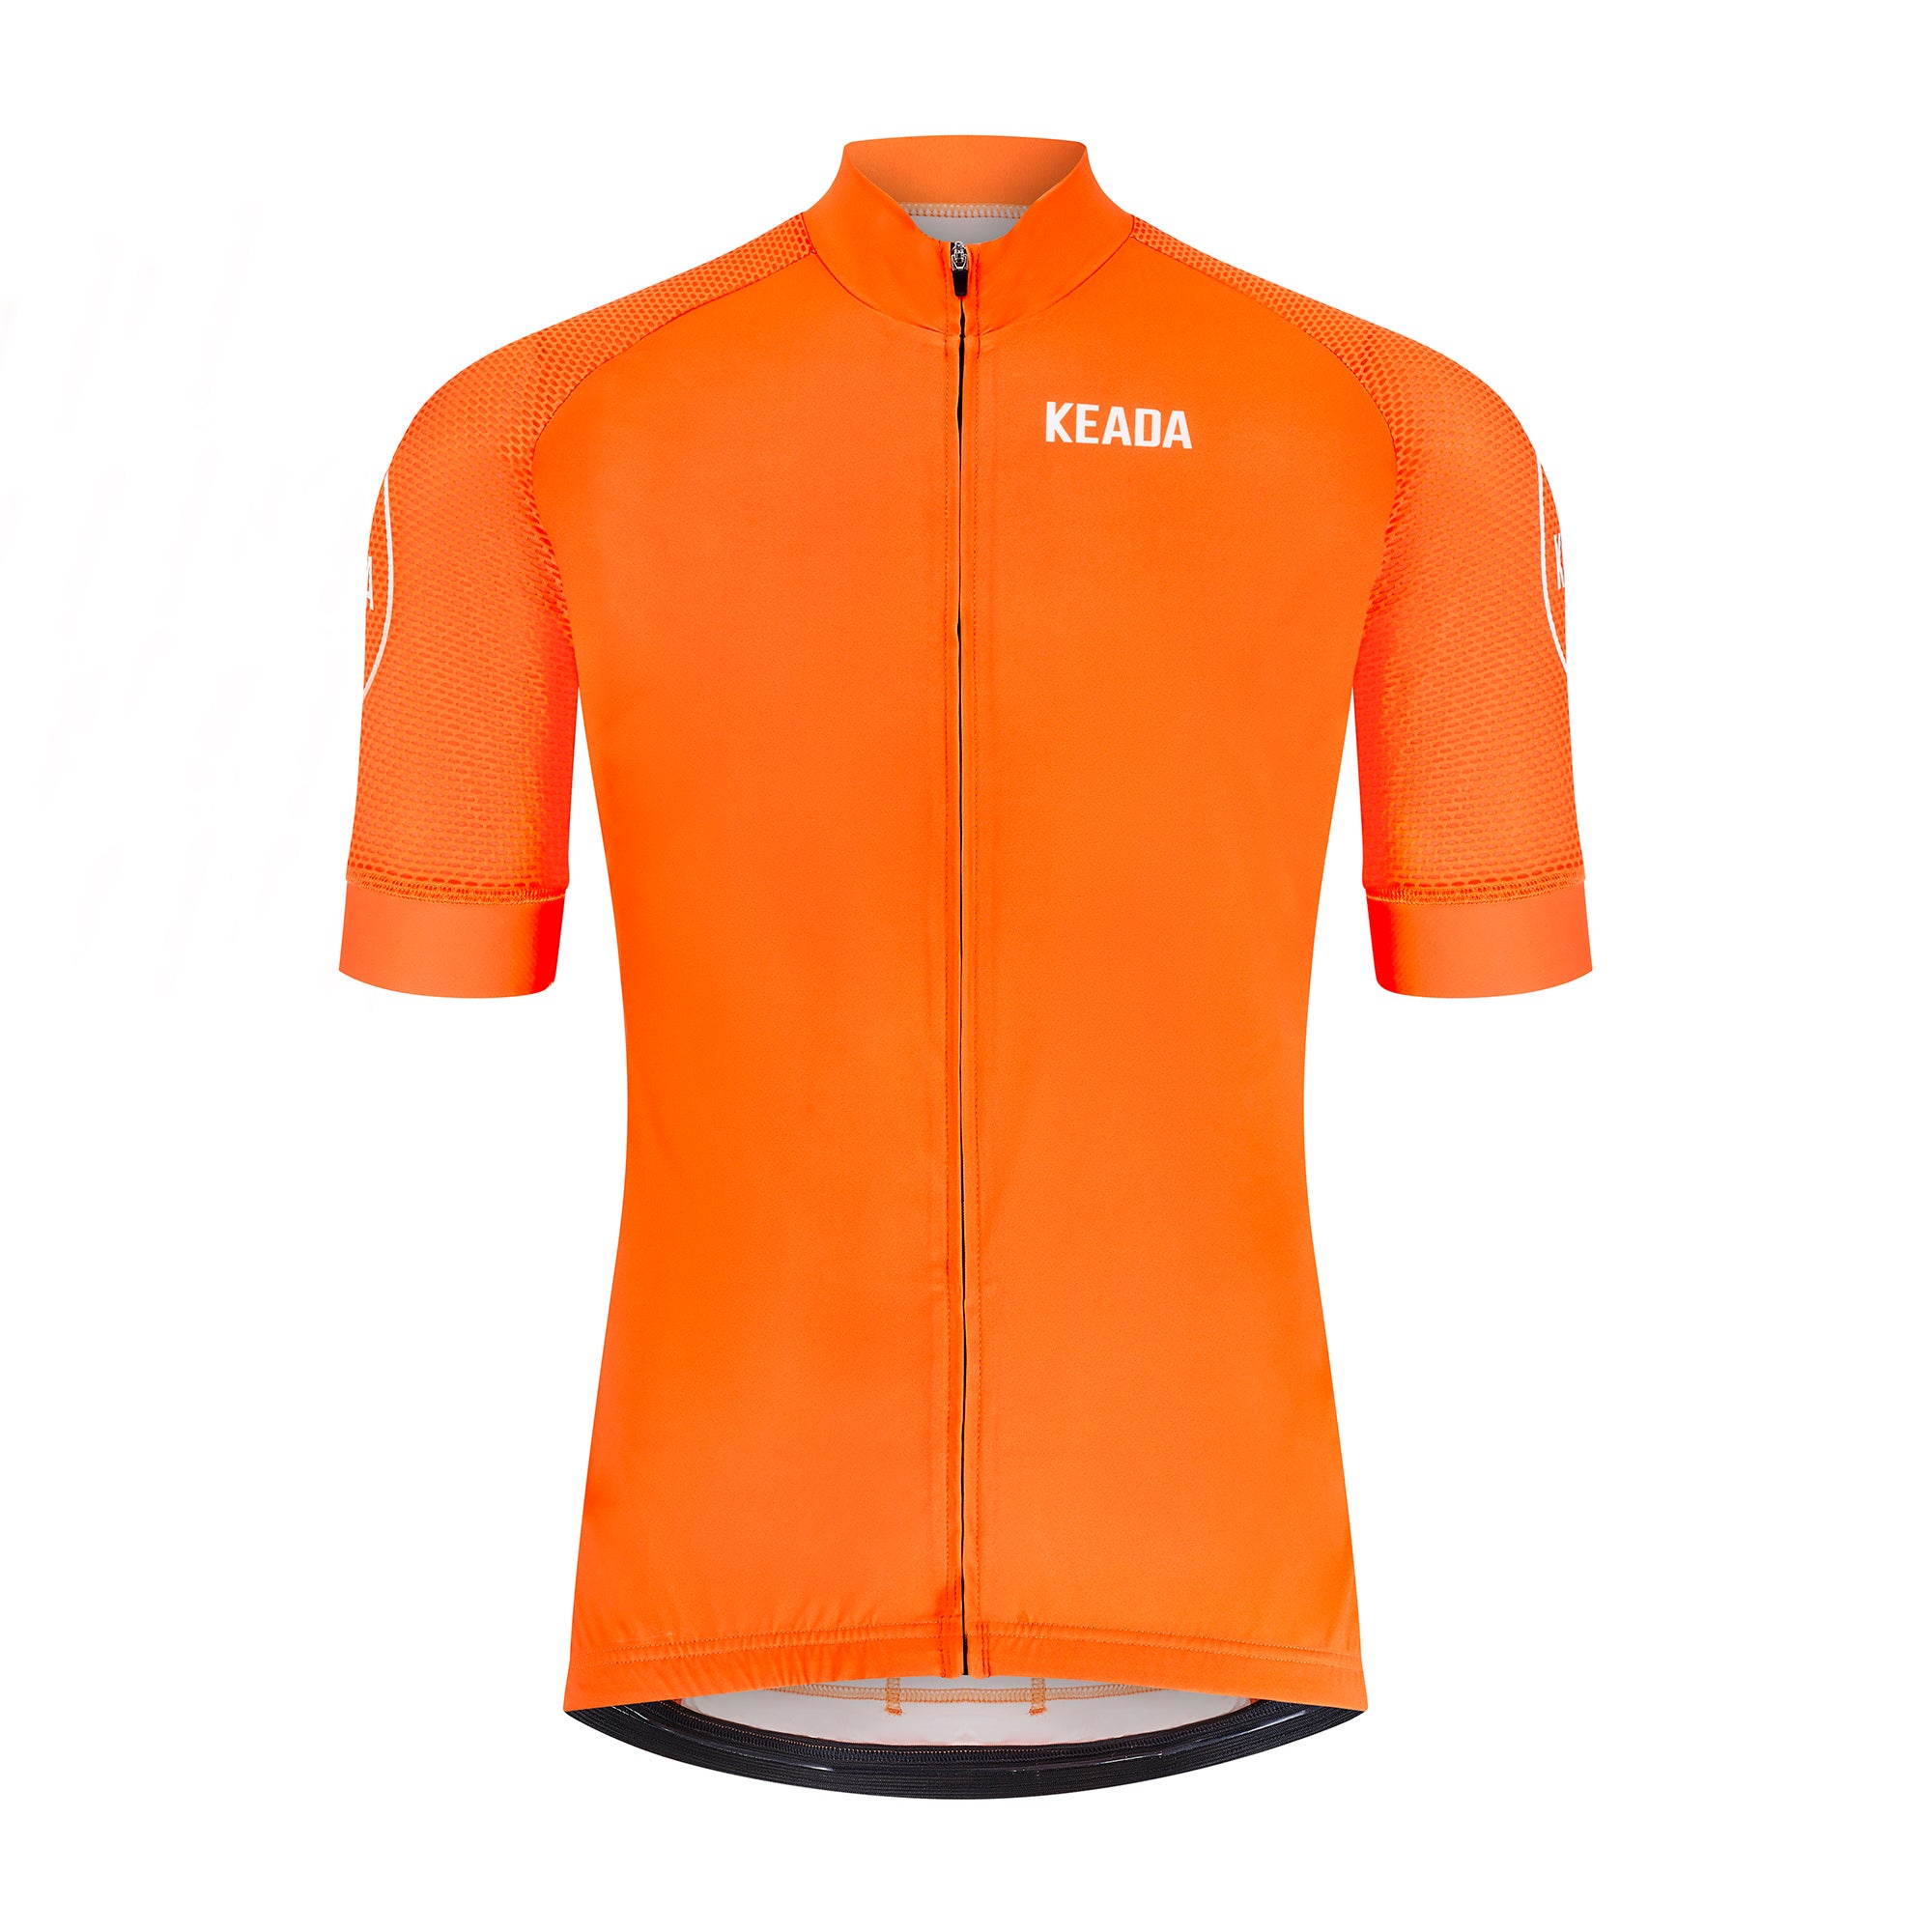 Women's Essential Short Sleeved Cycling Jersey - Orange